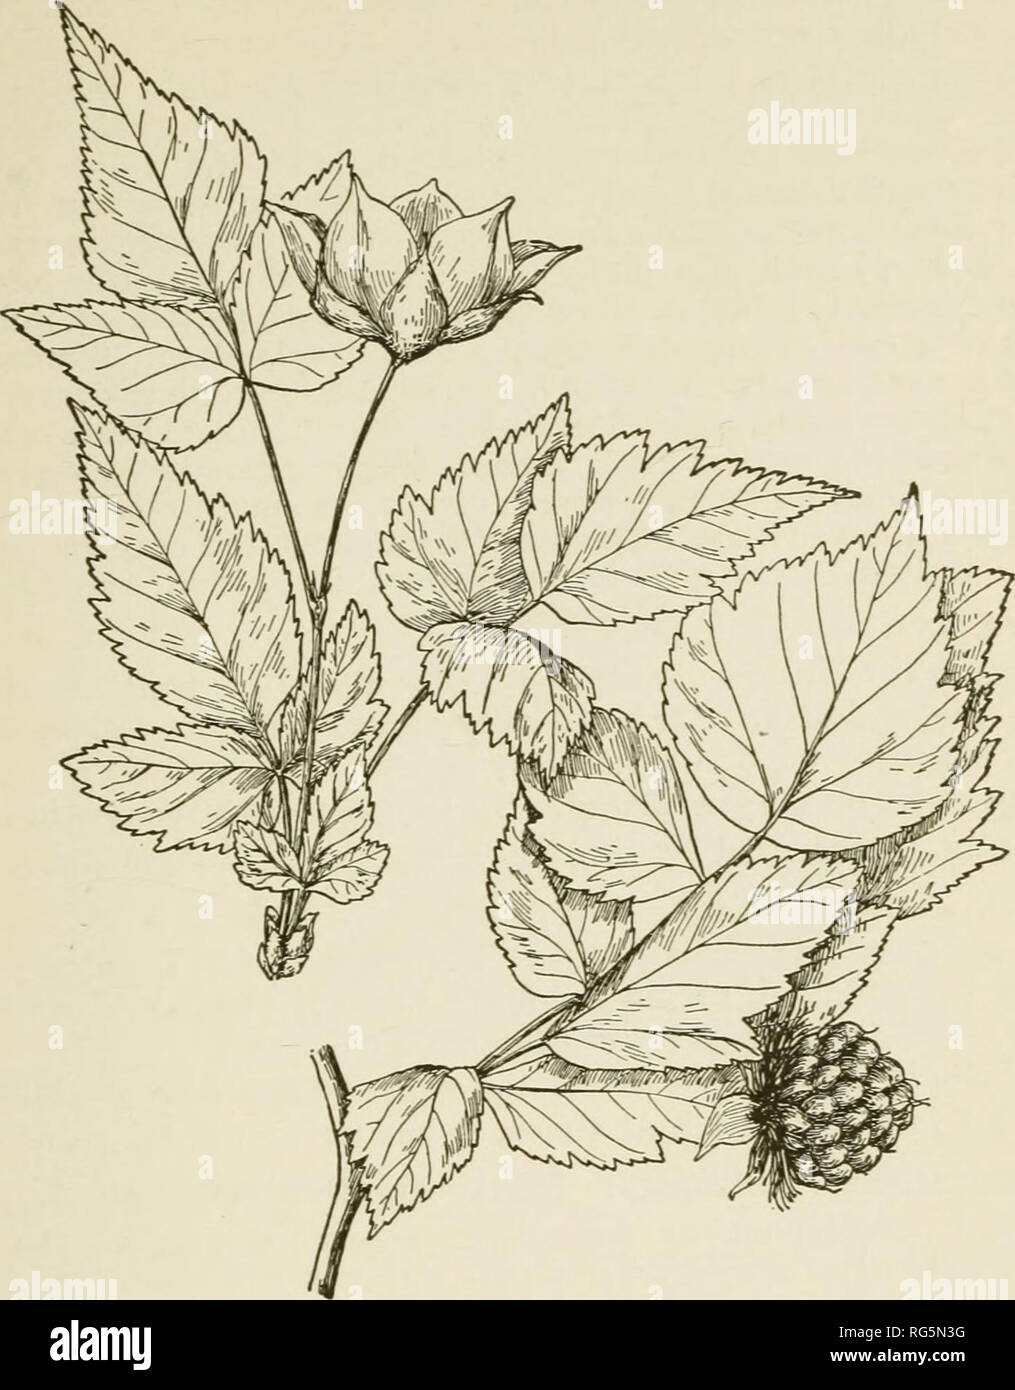 . Bush-fruits; a horticultural monograph of raspberries, blackberries, dewberries, currants, gooseberries, and other shrub-like fruits. Berries. BOSE-LEA VED BA SPBEBB F 323. Fig. 60. Rubtts spectabilis (X%). visible soft glandular hairs or dots; flowers 1-3 in terminal clusters, double in the cultivated form, white, rose-like, 1-2 inches (25-50 mm.) broad, borne in succession; fruit of the wild form red or yellow, about an inch in diameter, made up of many small carpels. Original distrihution.—Japan, China and the East Indies. For an account of B. roscefoUus in cultivation, the reader is refe Stock Photo